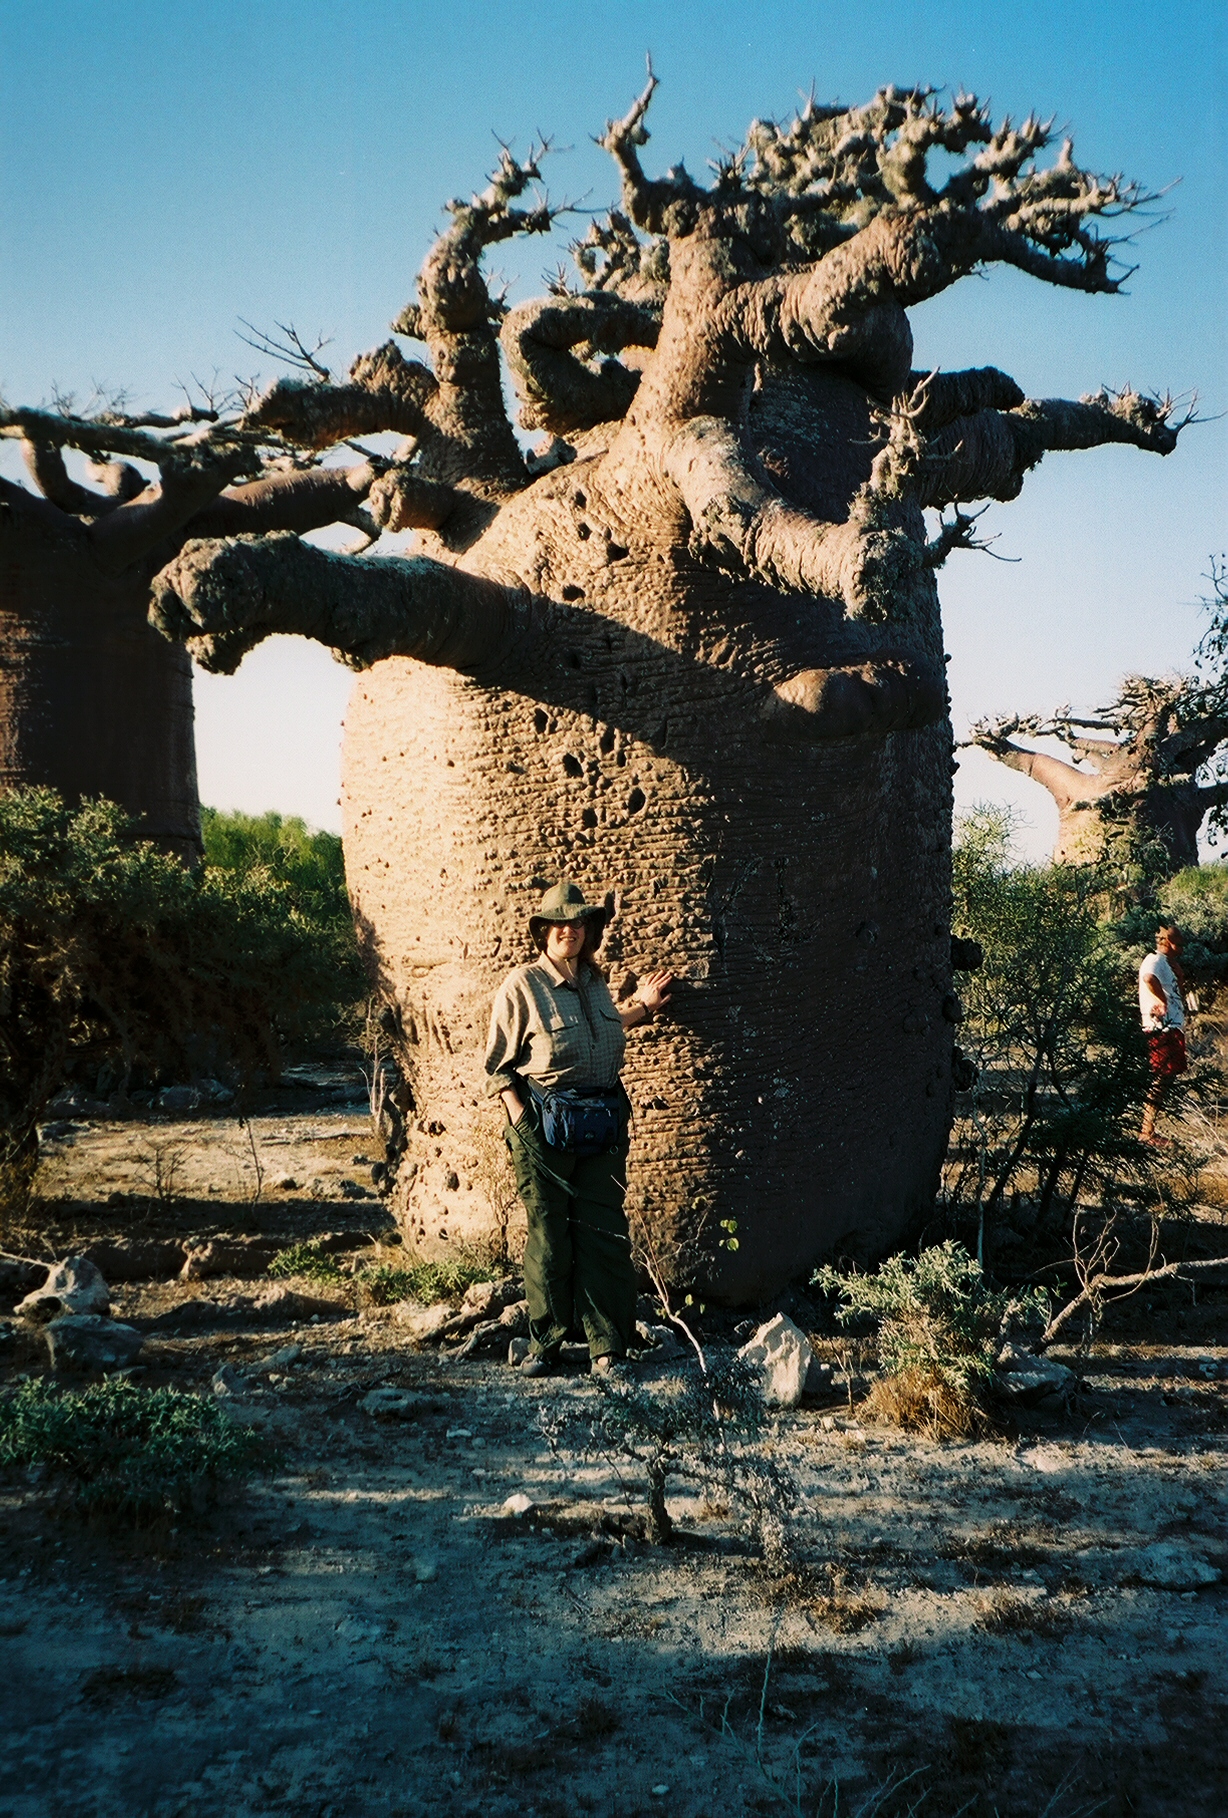 me in front of a baobab